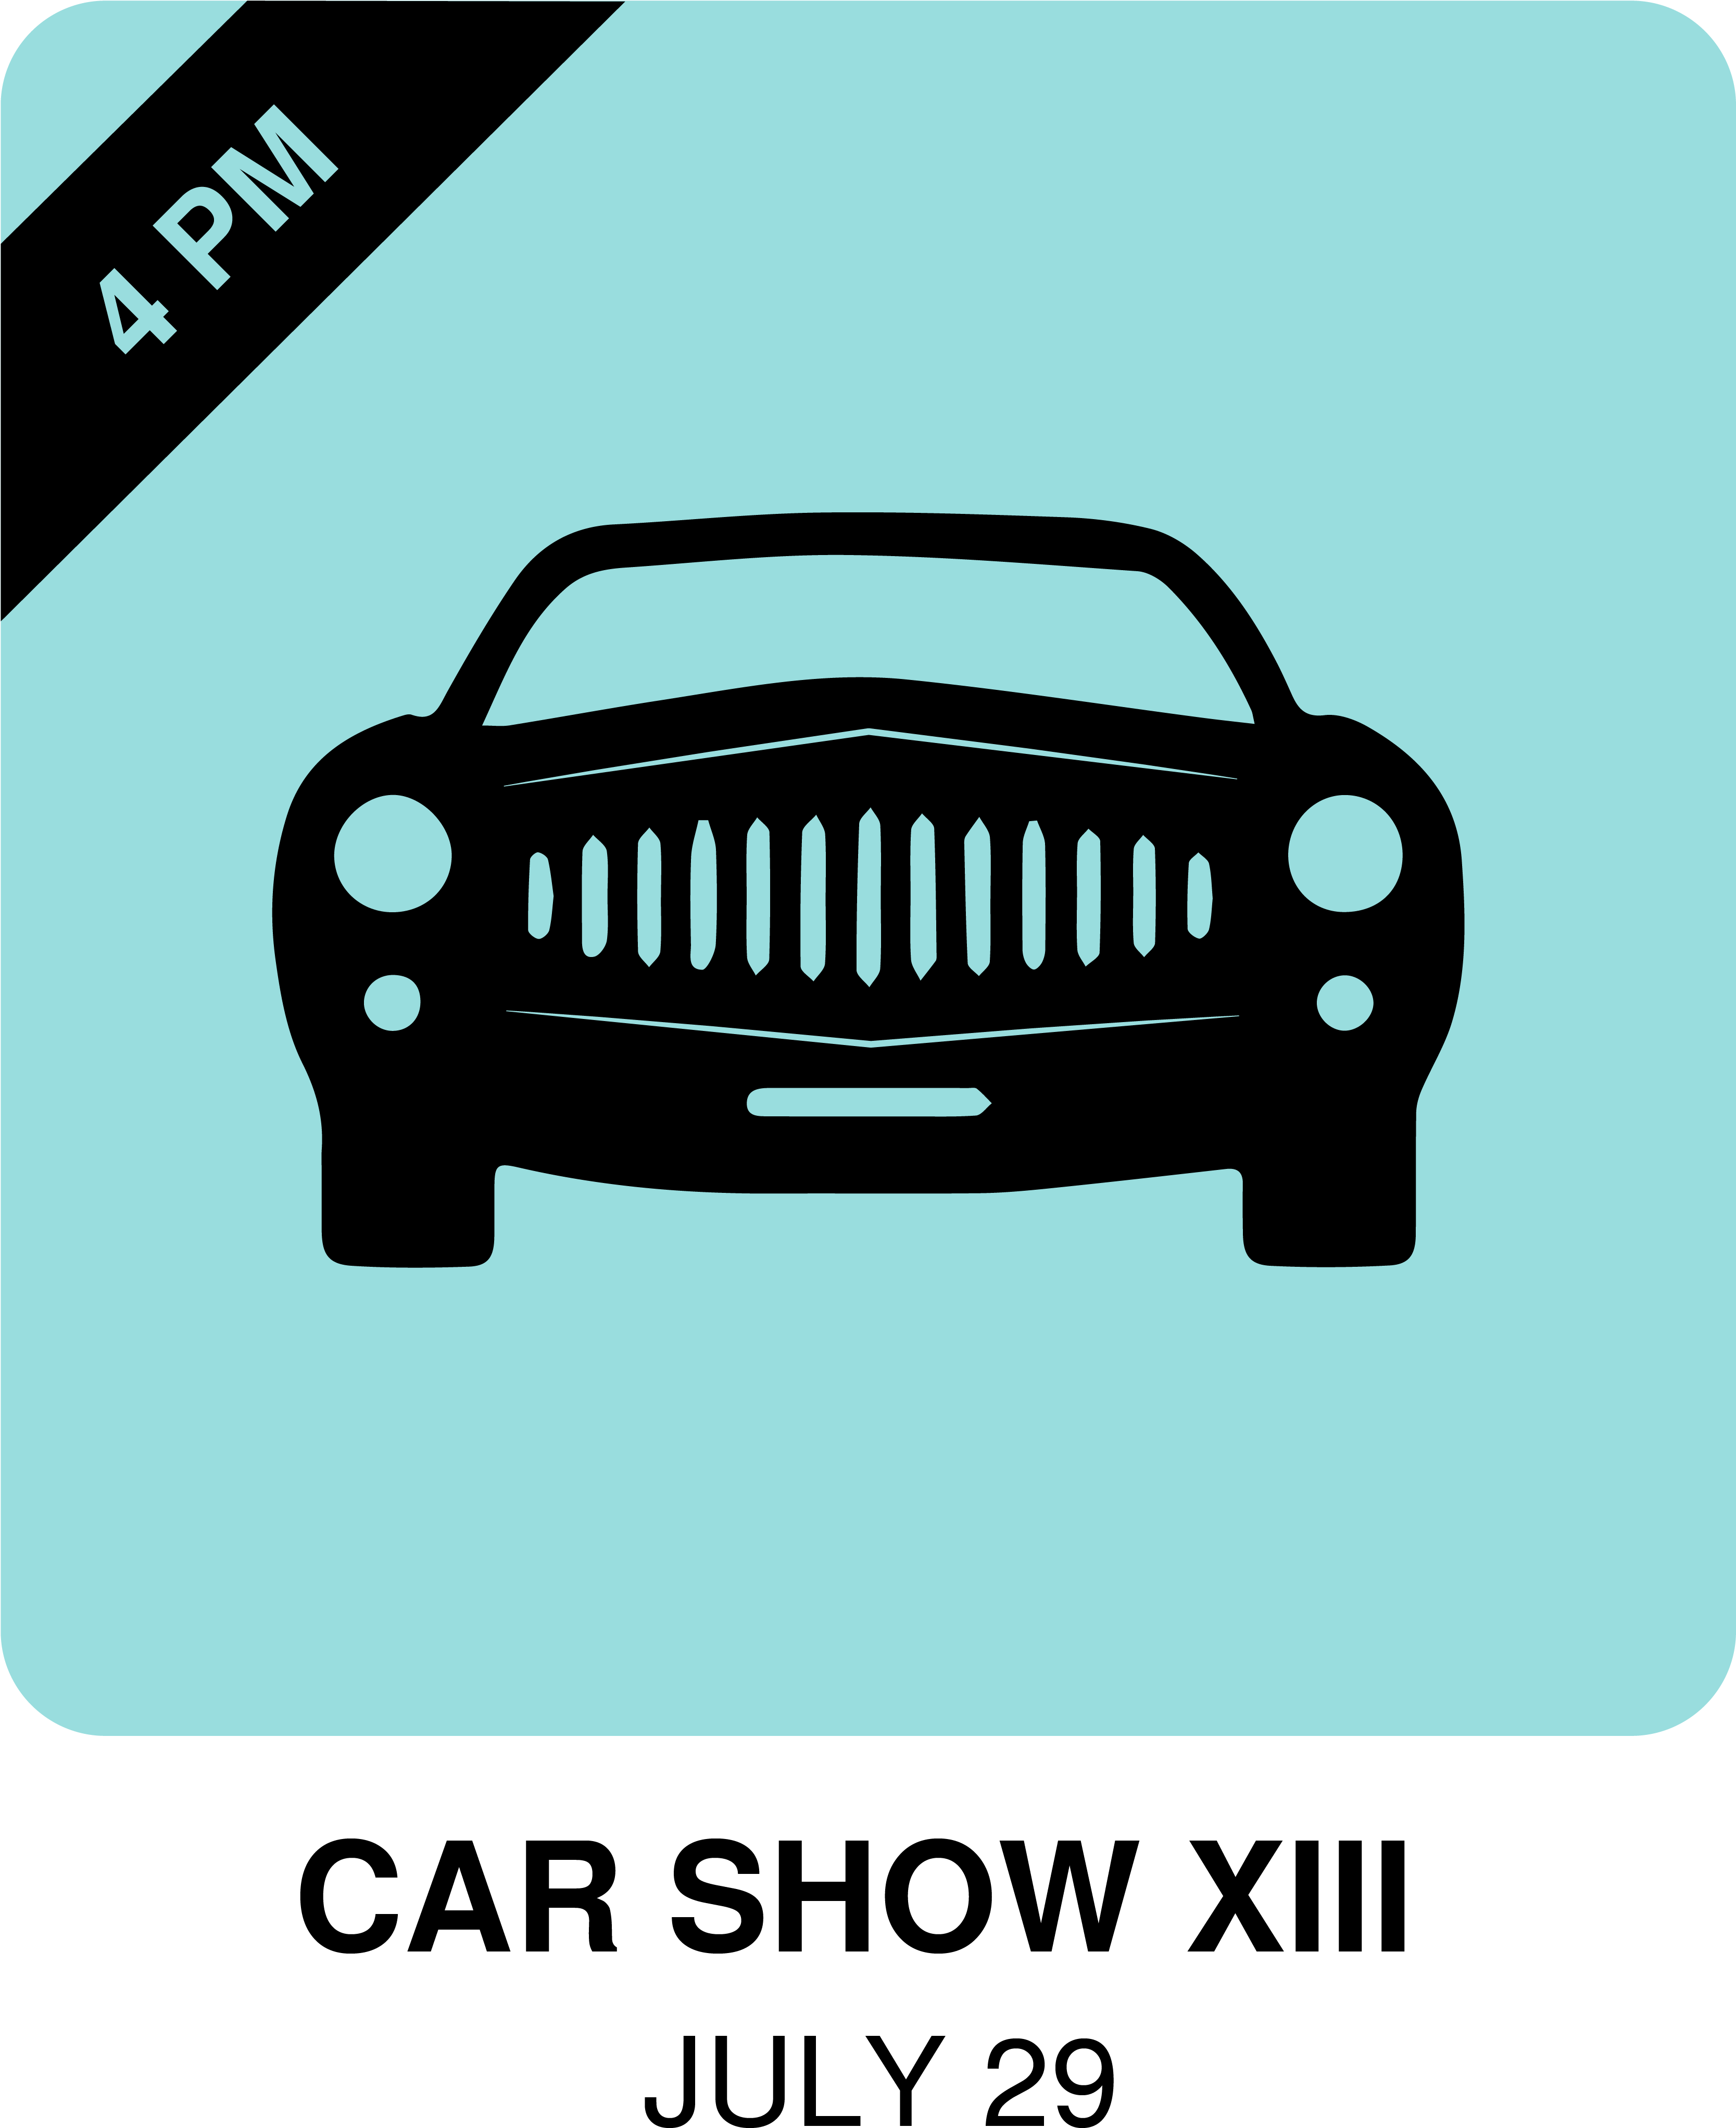 13th Annual Car Show - Car Silhouette Transparent Background (3334x4167), Png Download